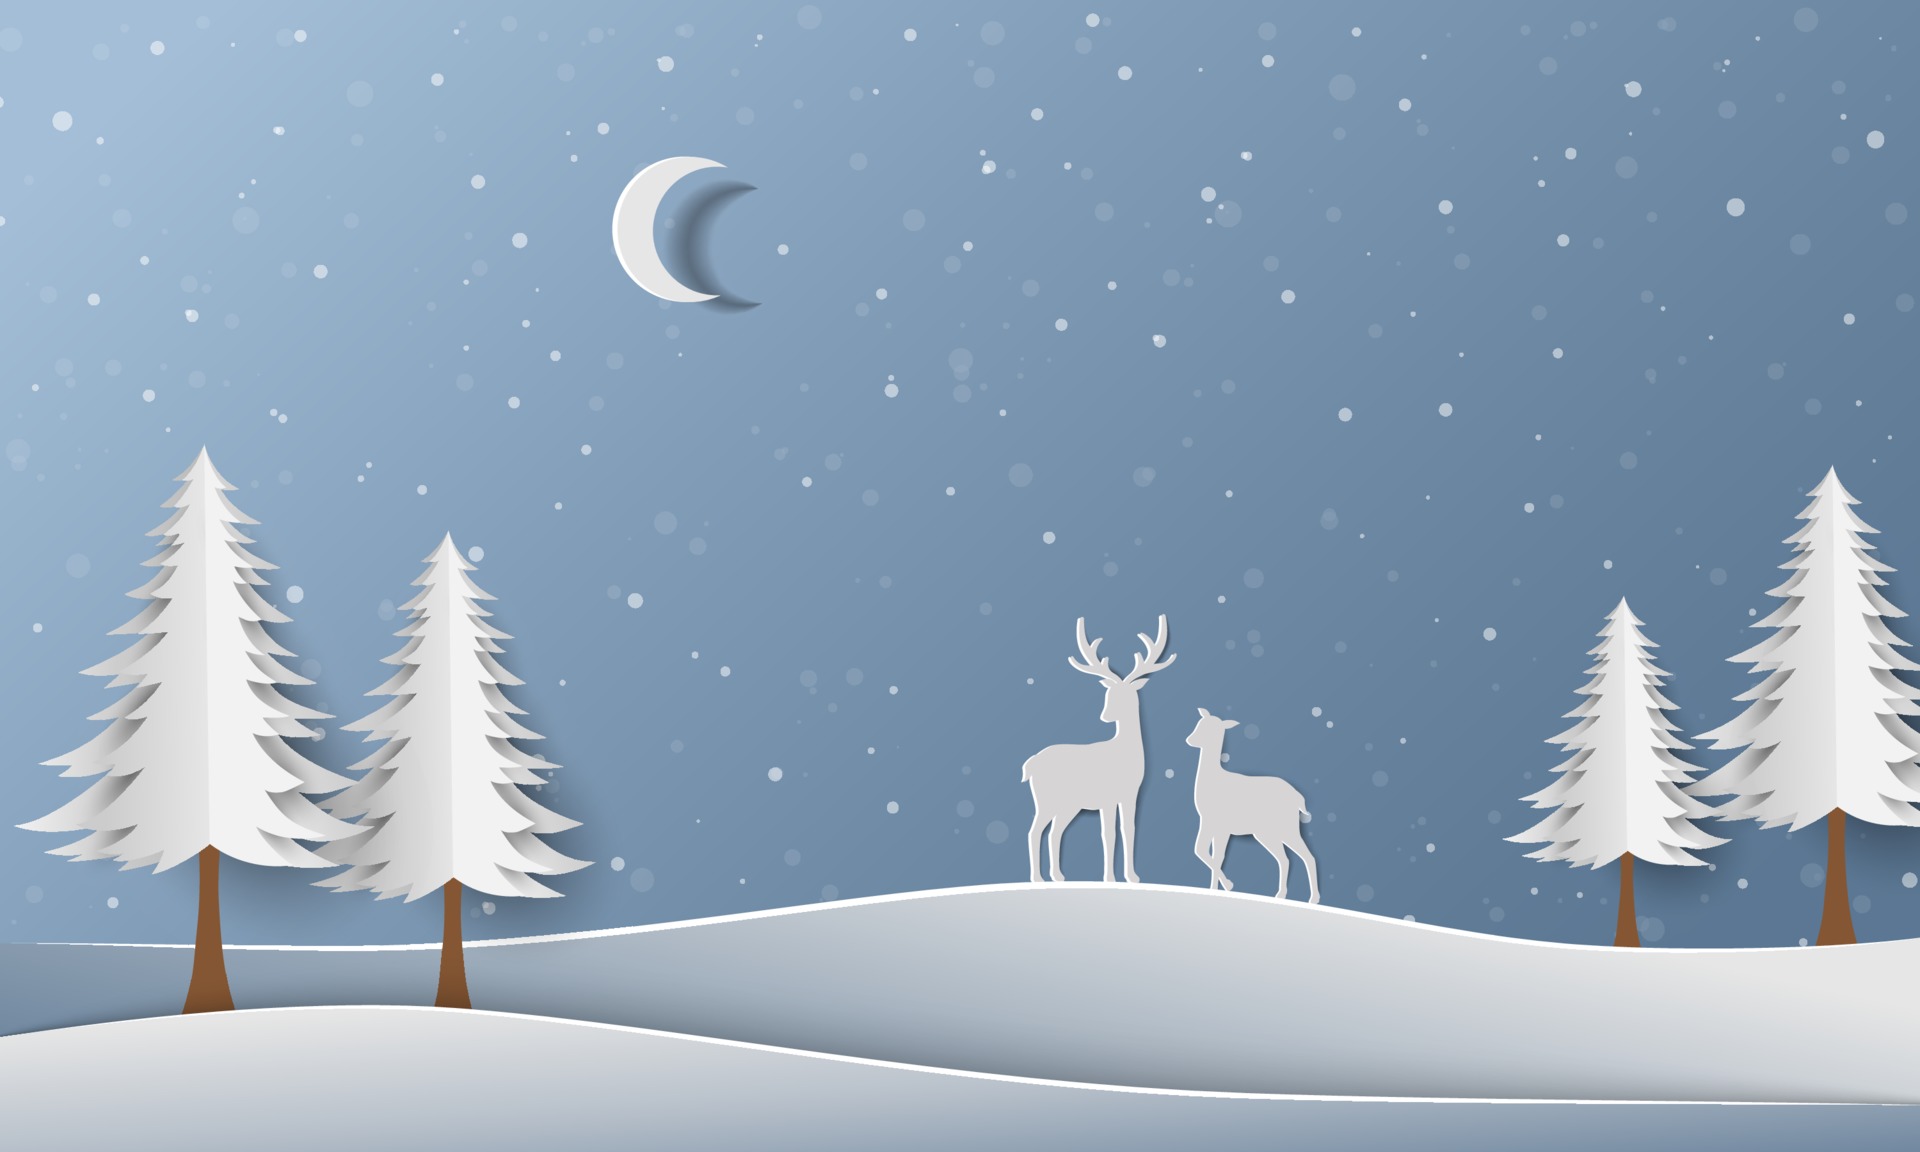 Winter forest with deer family on paper art background